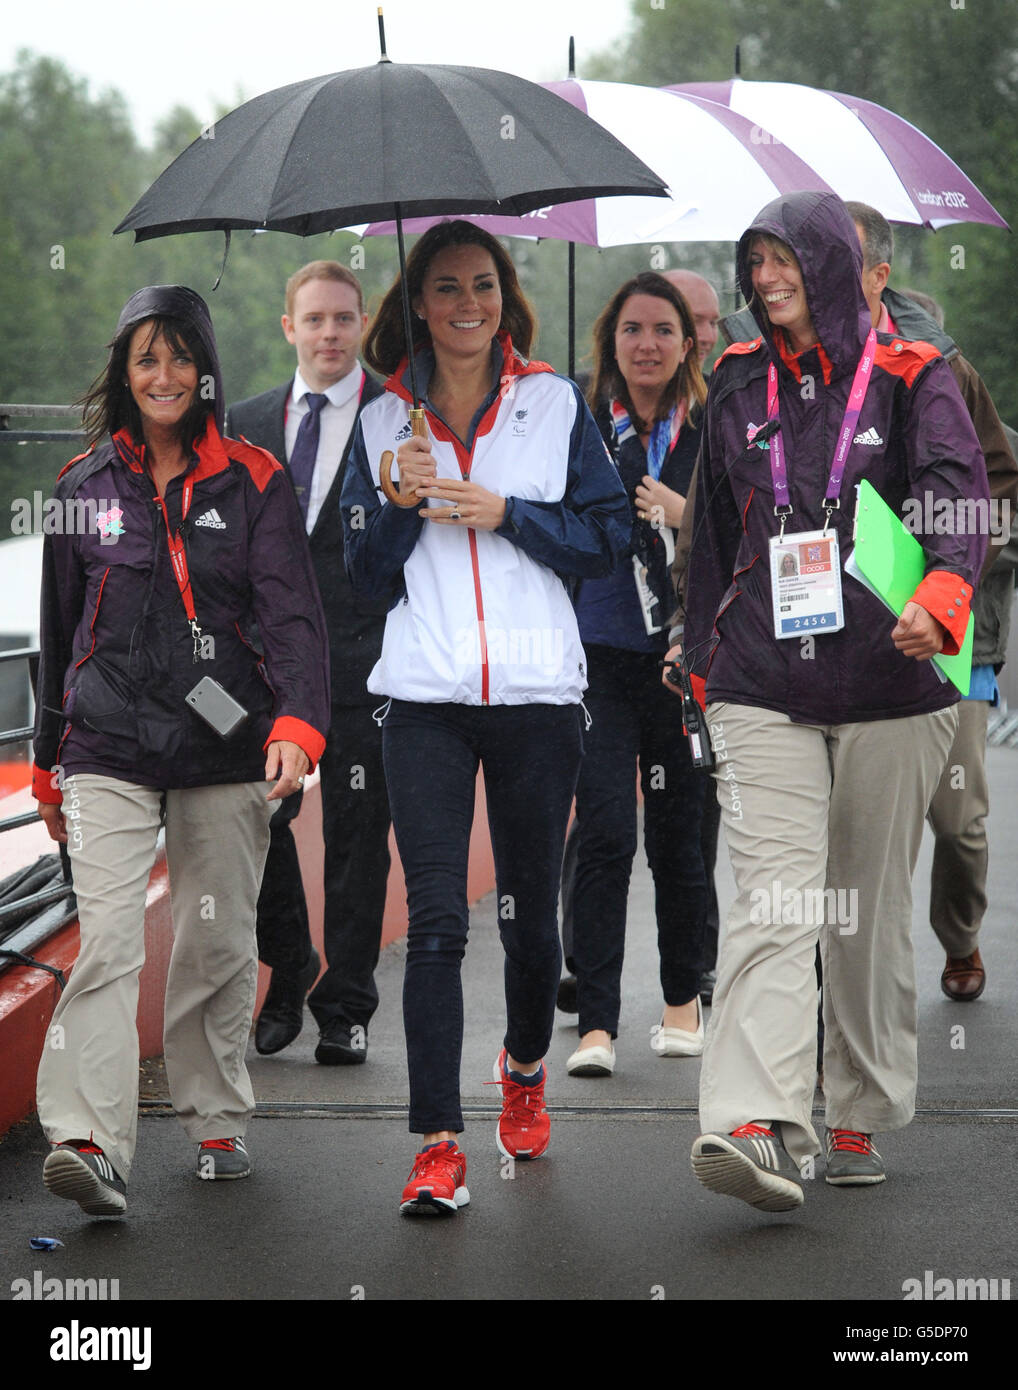 The Duchess of Cambridge arrives to watch the rowing finals at Eton Dorney in Berkshire during the Paralympic Games. Stock Photo